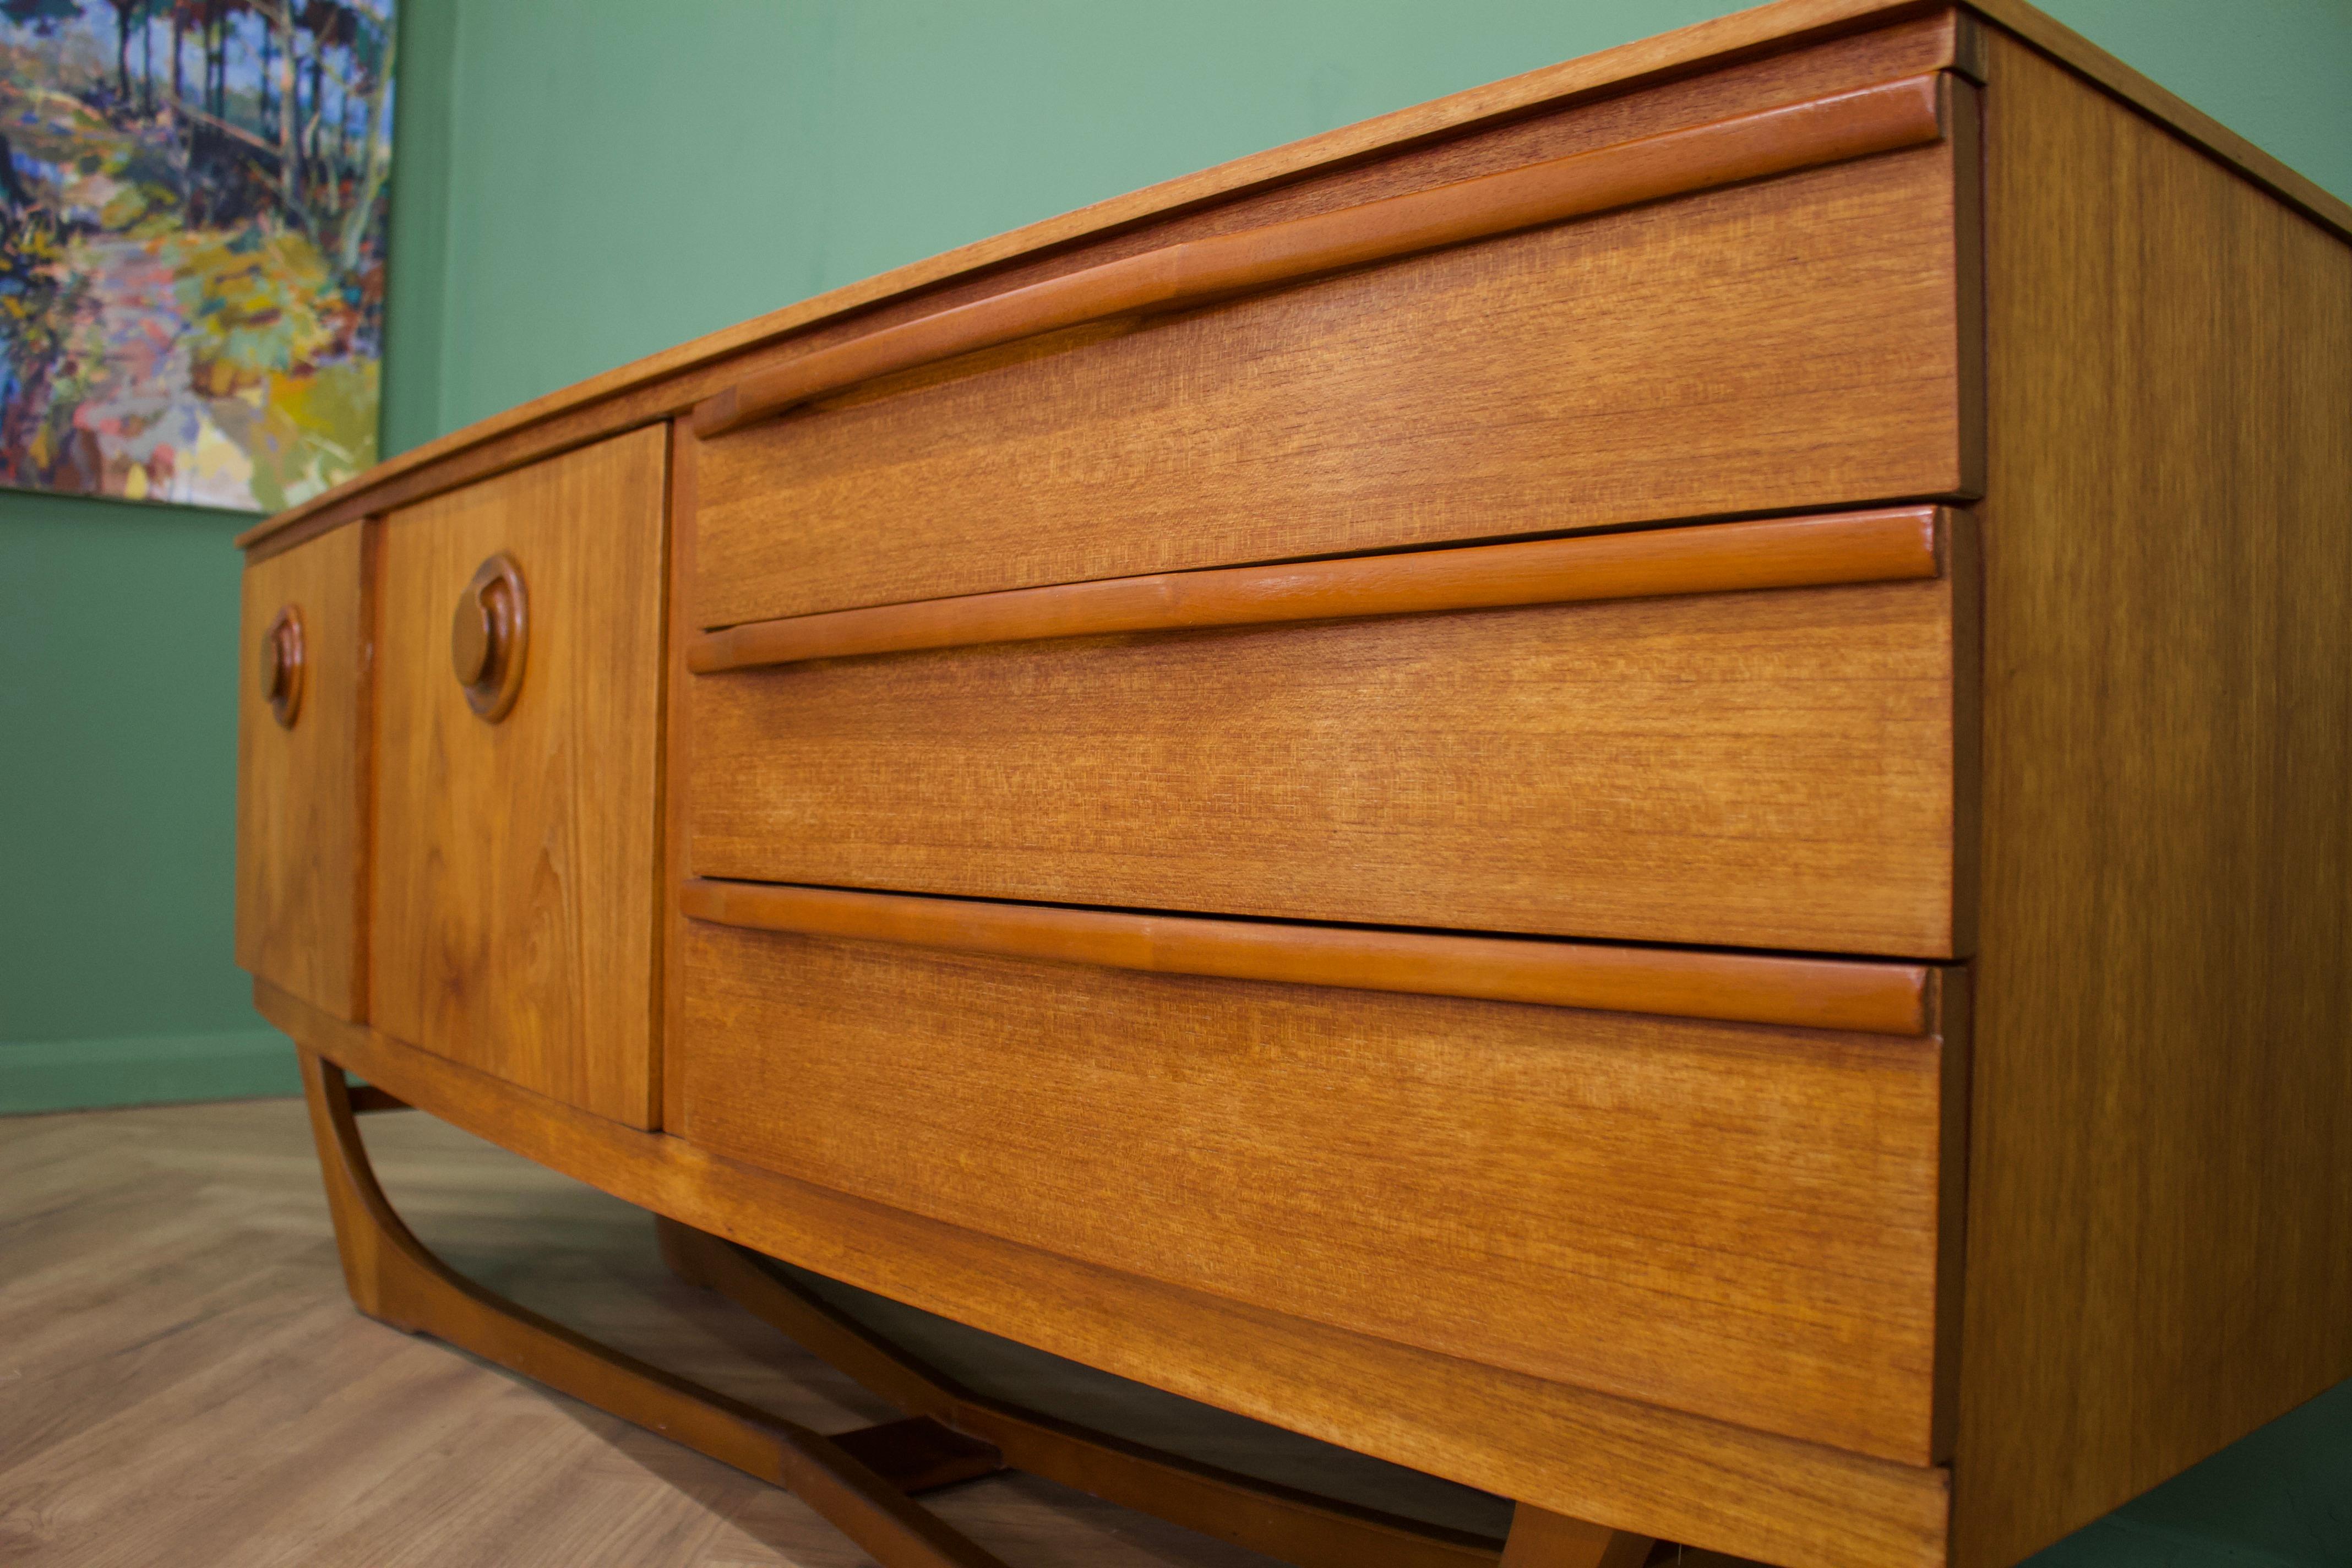 British Mid-Century Teak Sideboard from Beautility, 1960s